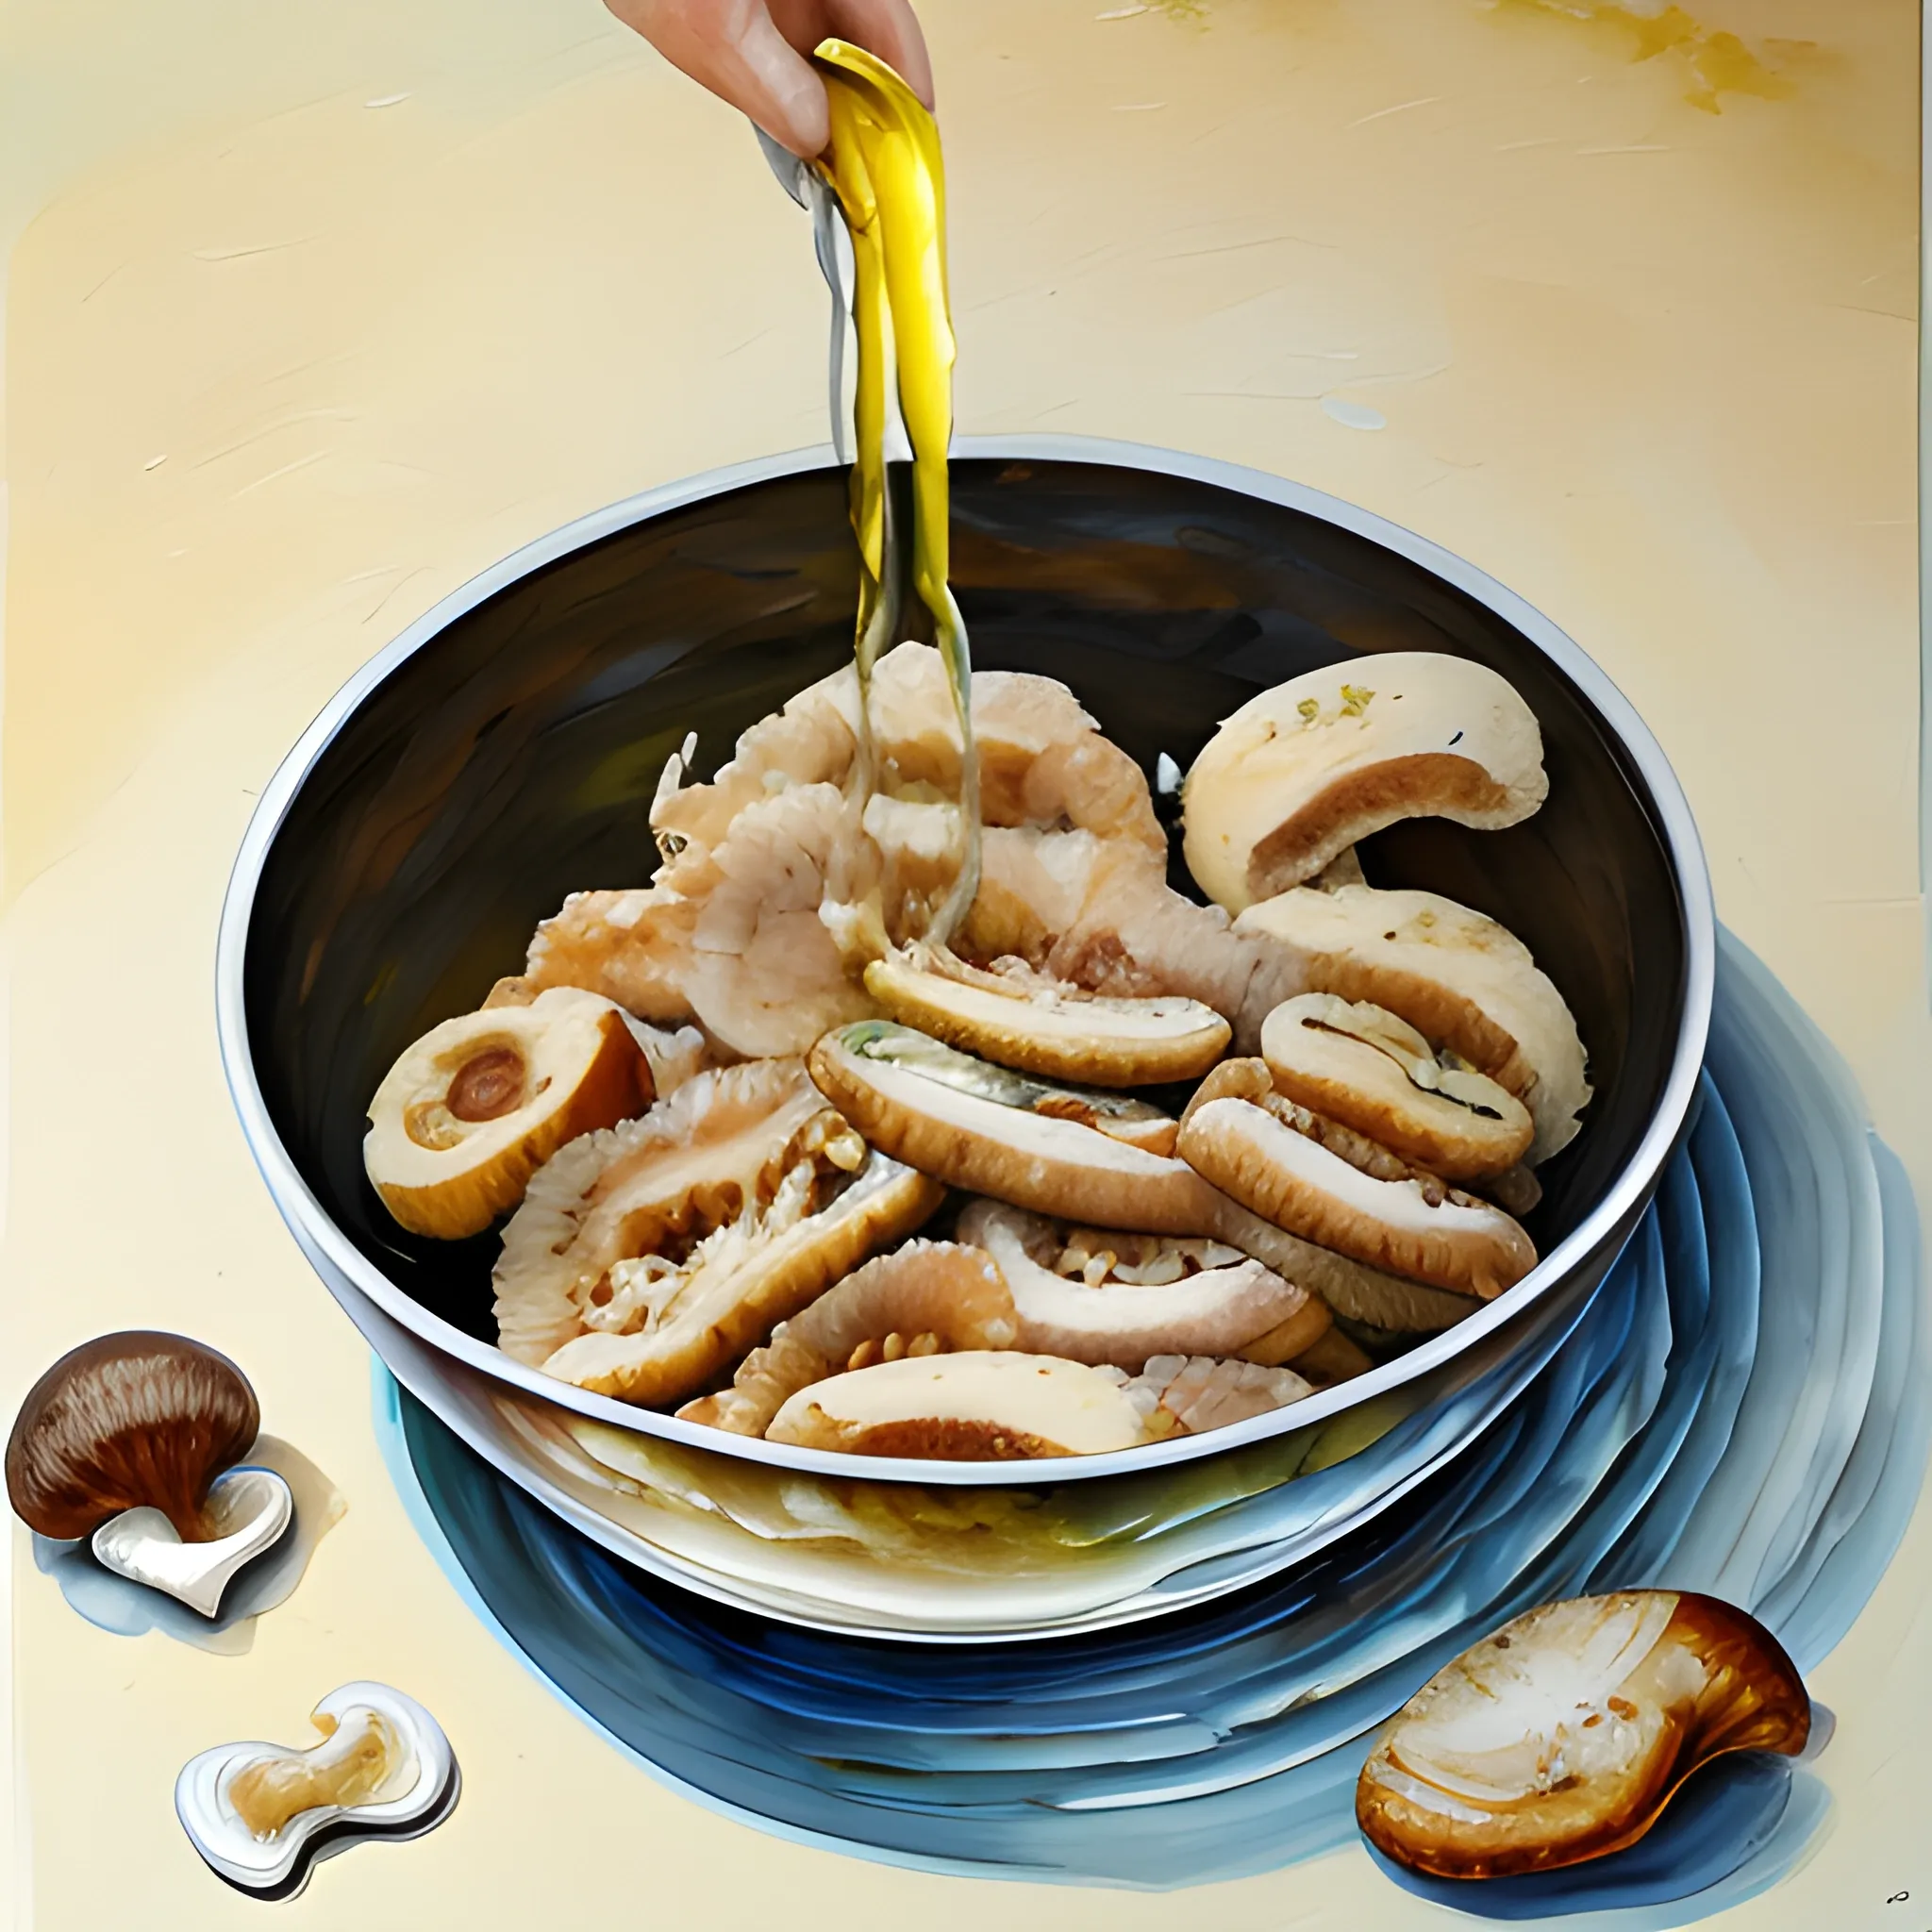 Put the sliced chicken pieces in the basin, and some shiitake mushrooms, set aside, Oil Painting, Oil Painting, Water Color